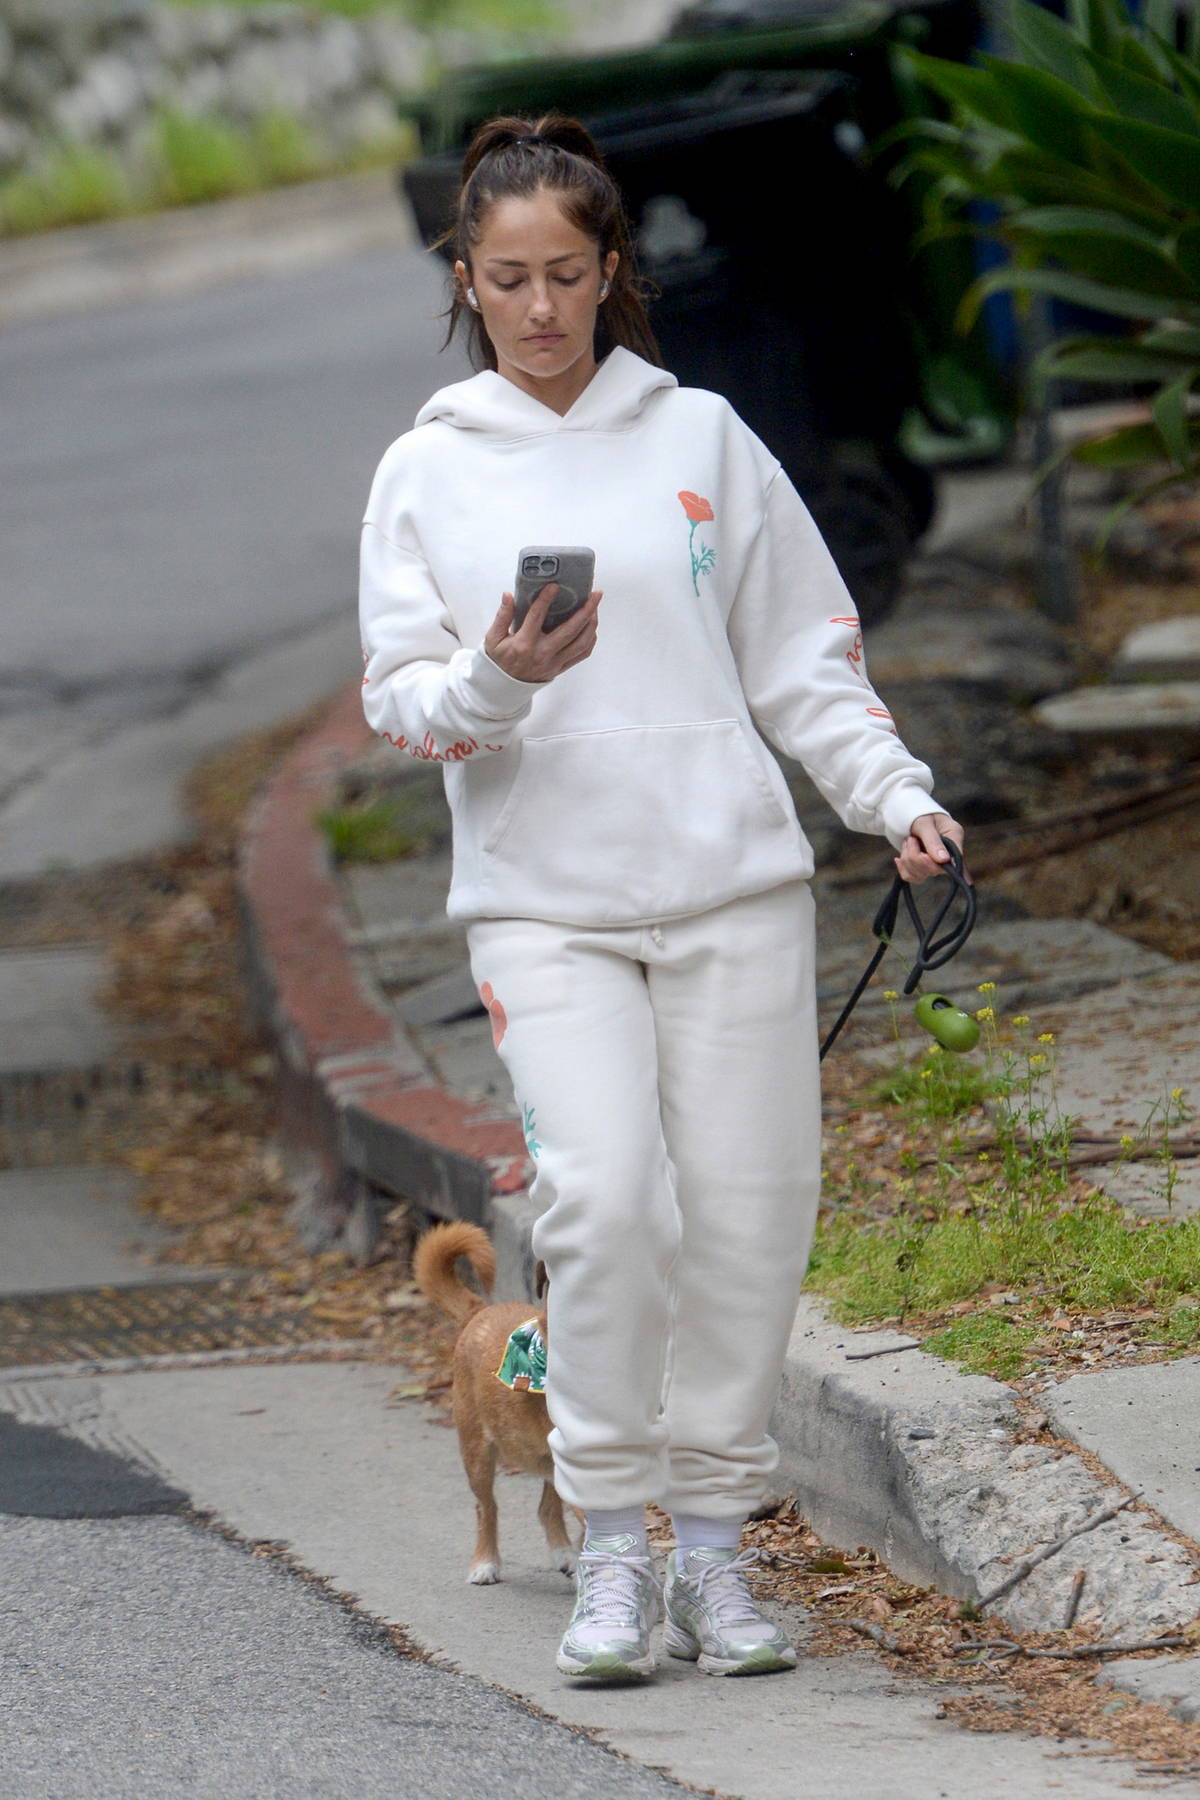 Shopping at A.P.C with her dog and a friend on Melrose Place in